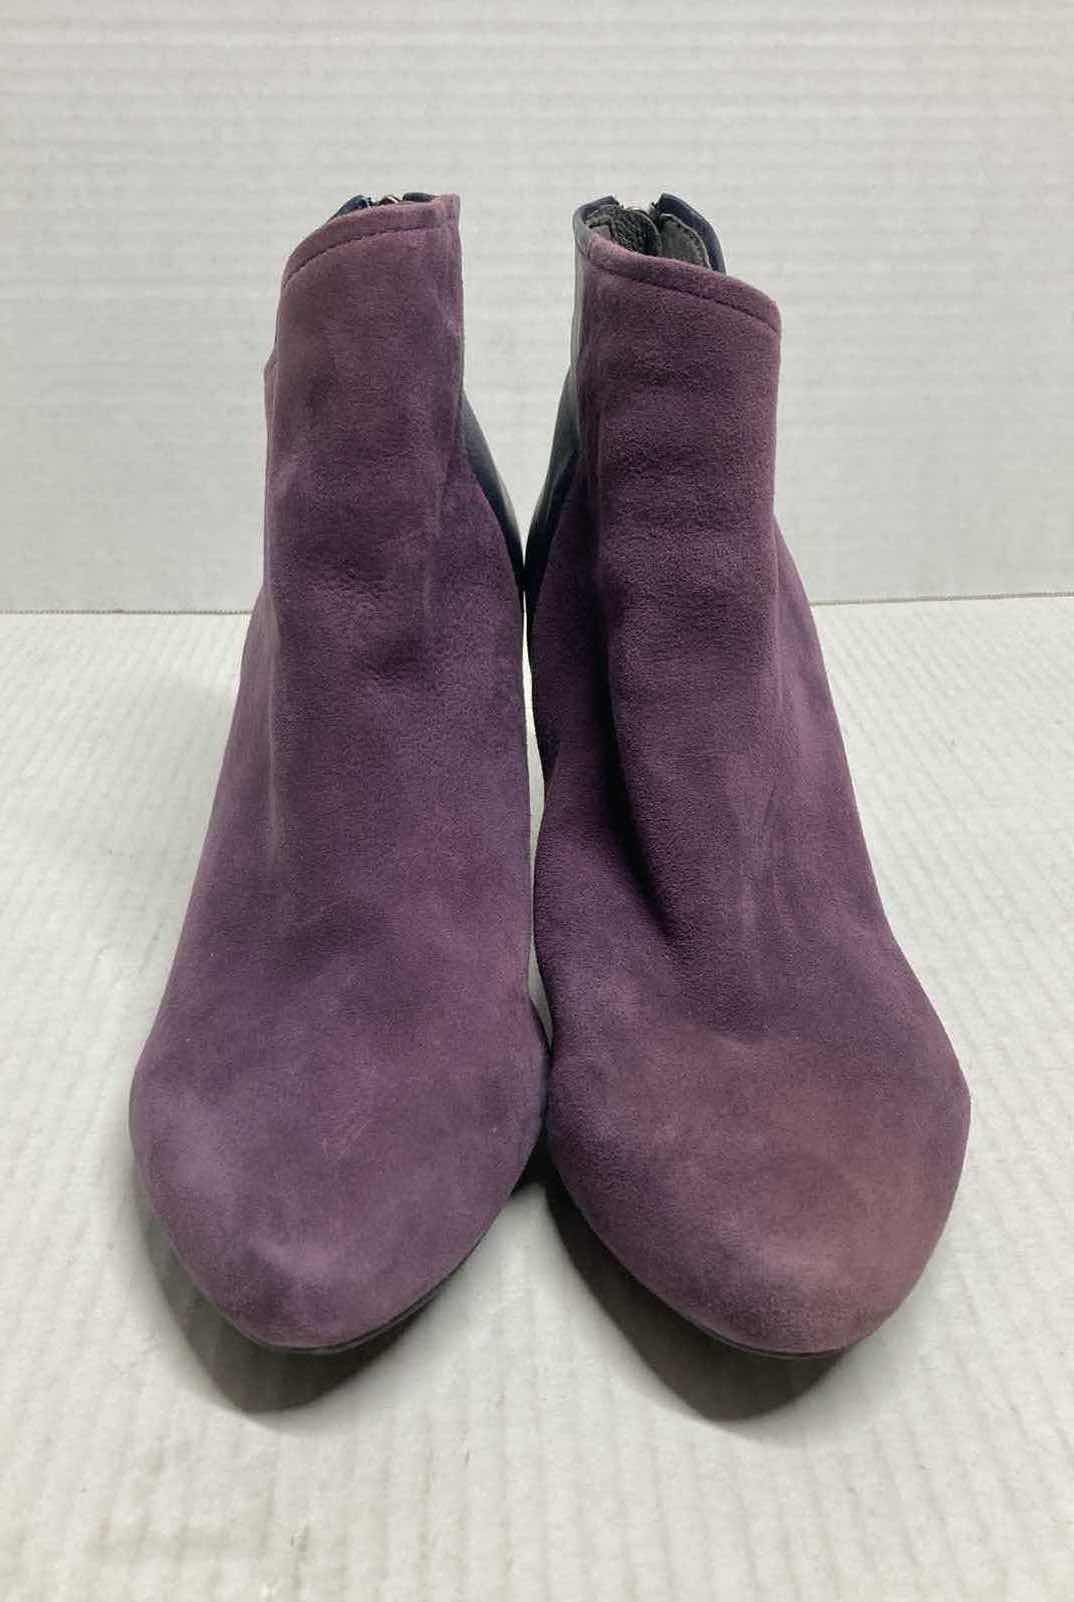 Photo 2 of TSUBO PURPLE & BLUE SUEDE LEATHER ANKLE HEEL BOOTS WOMAN’S SIZE 9